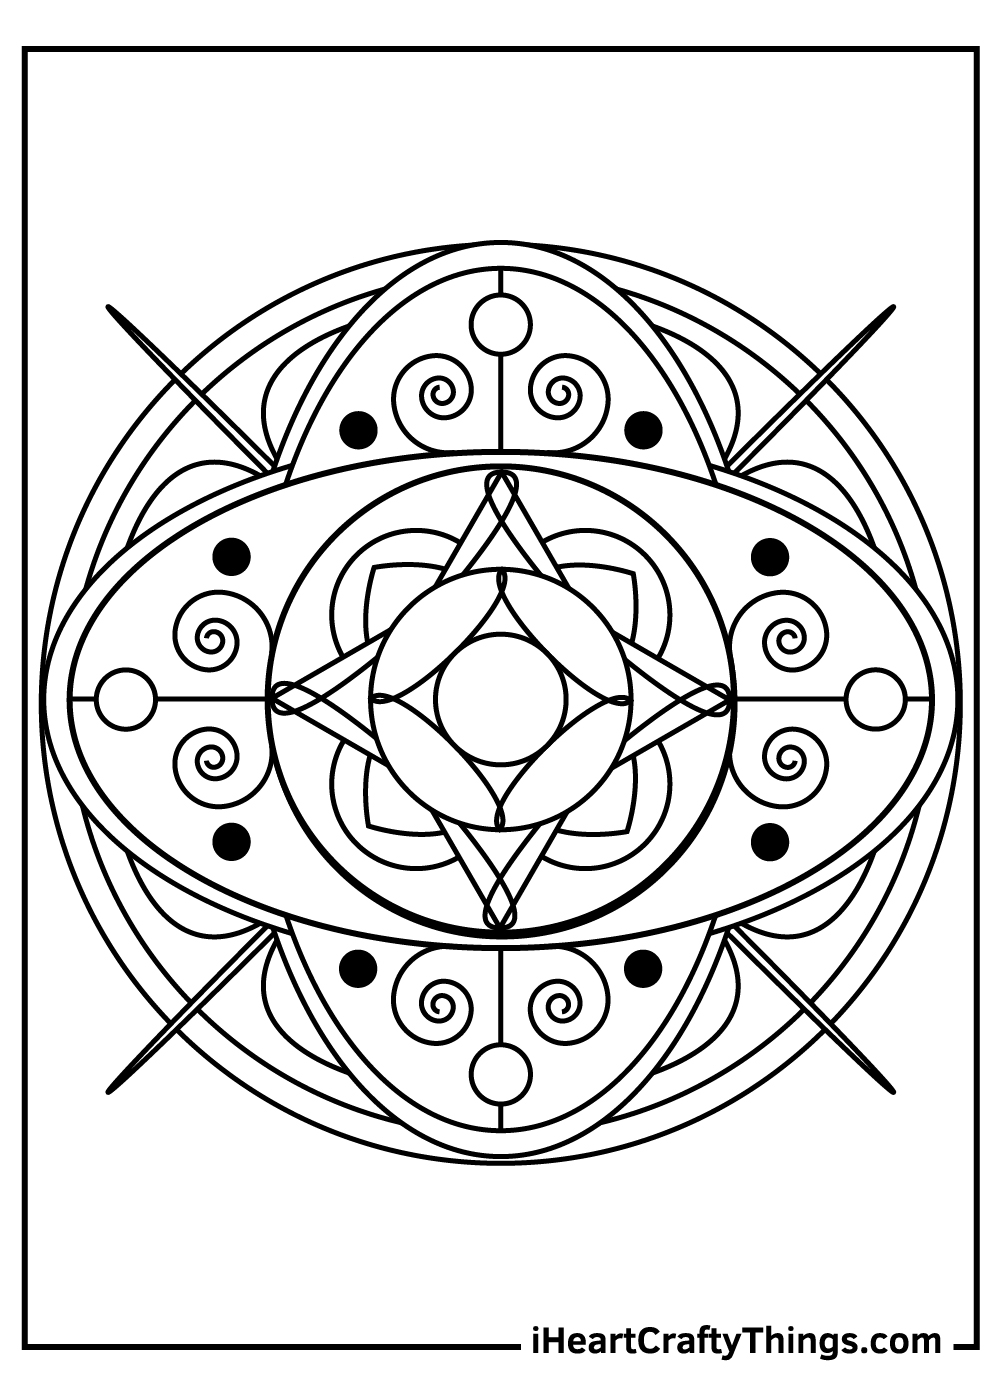 mandala coloring pages for adults